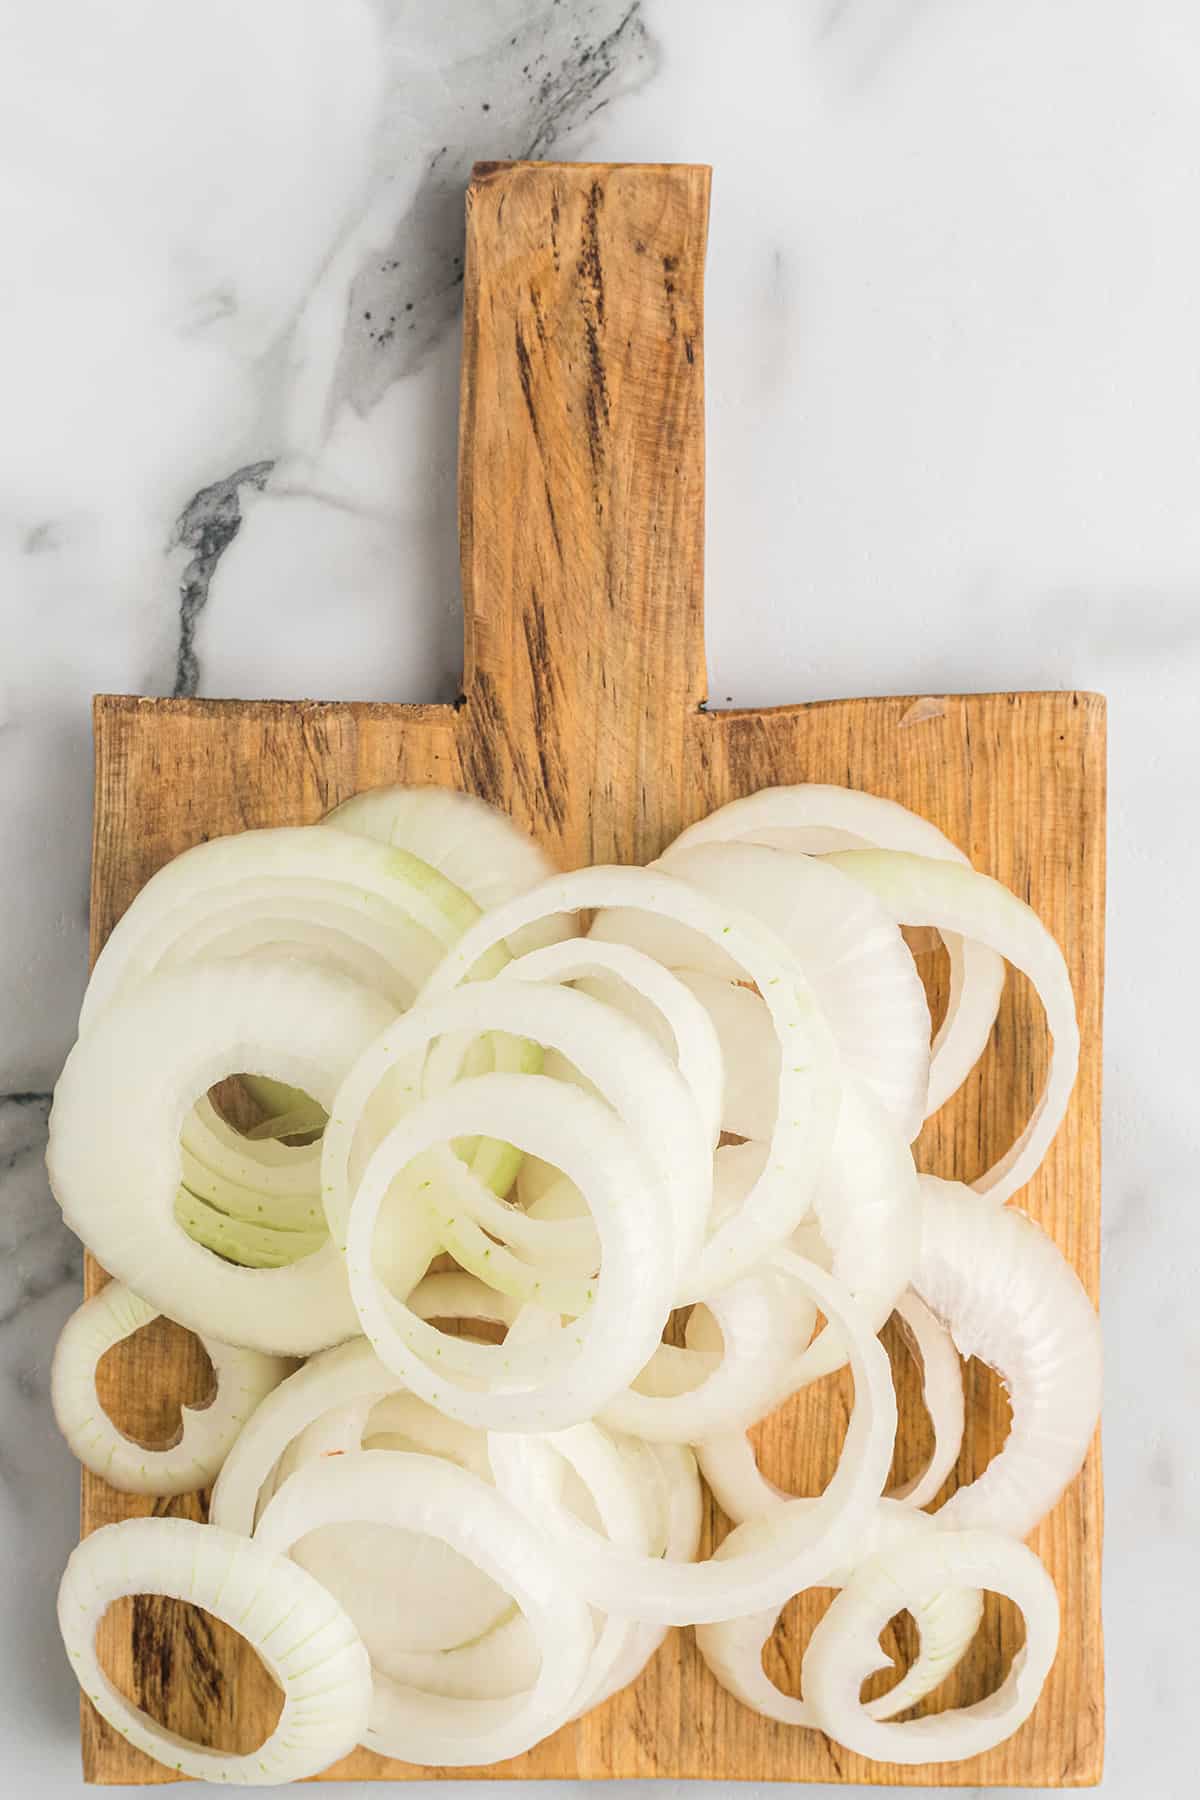 Onion rings on a wooden cutting board.